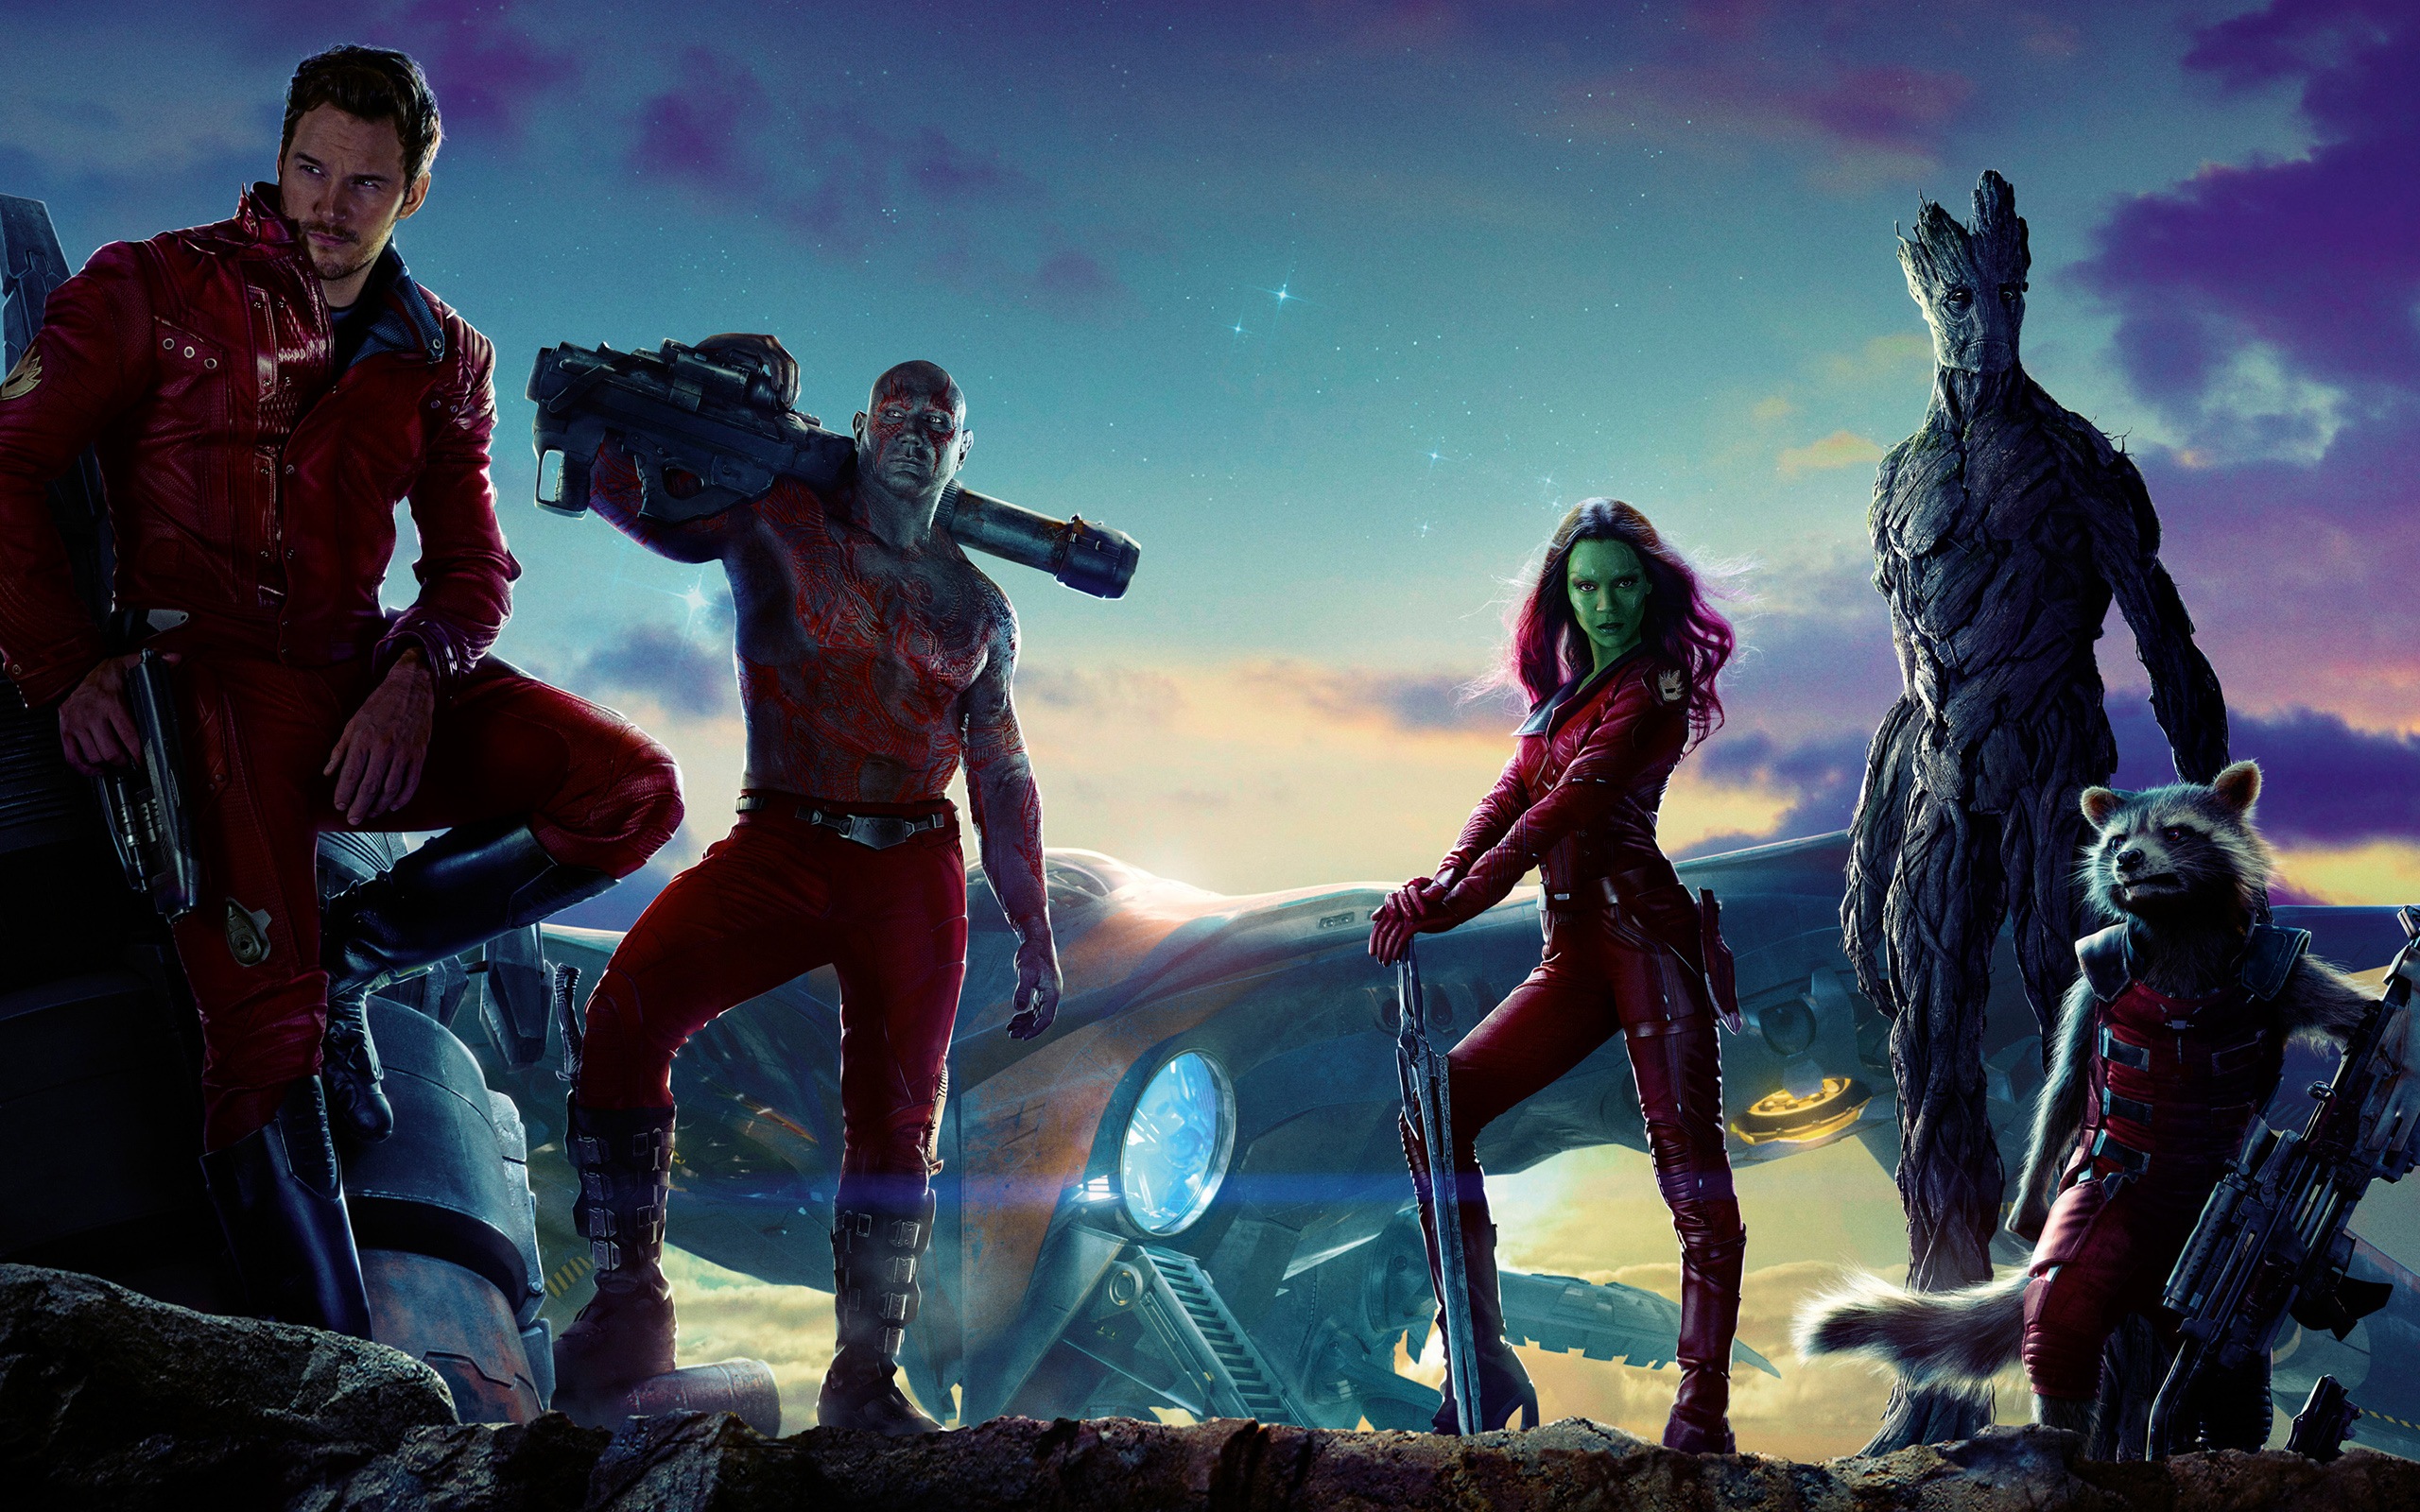 Guardians of the Galaxy 2014 HD movie wallpapers #4 - 2560x1600